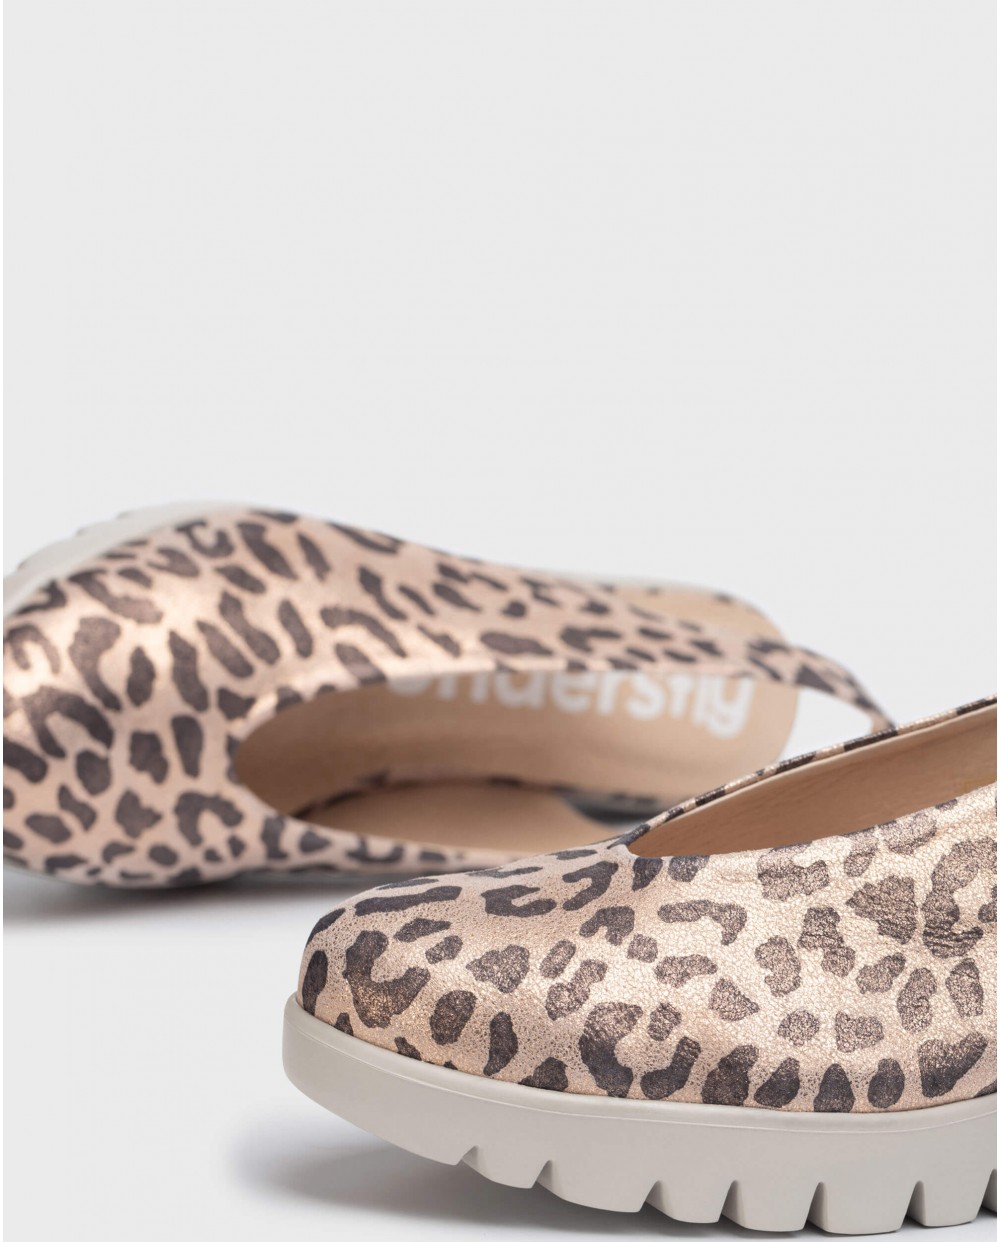 animal print leather loafer mule